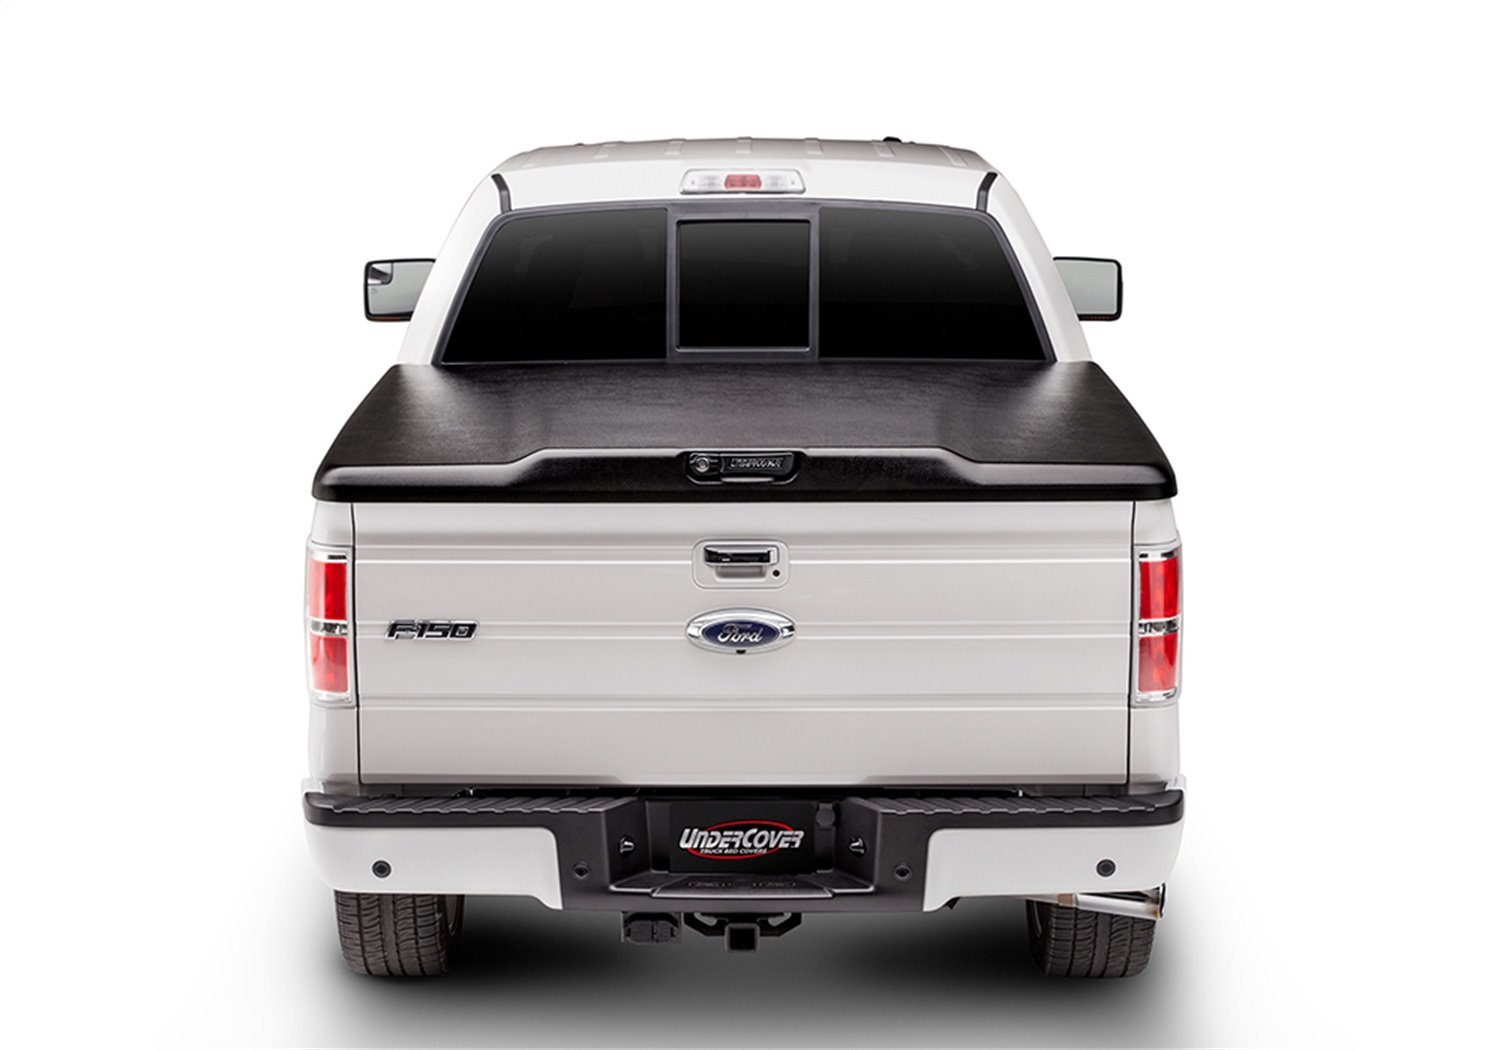 UC4148 Elite Hard Non-Folding Cover, Fits Select Toyota Tacoma 6'Bed STD/EXT w/ Deck Rail System, Black Textured